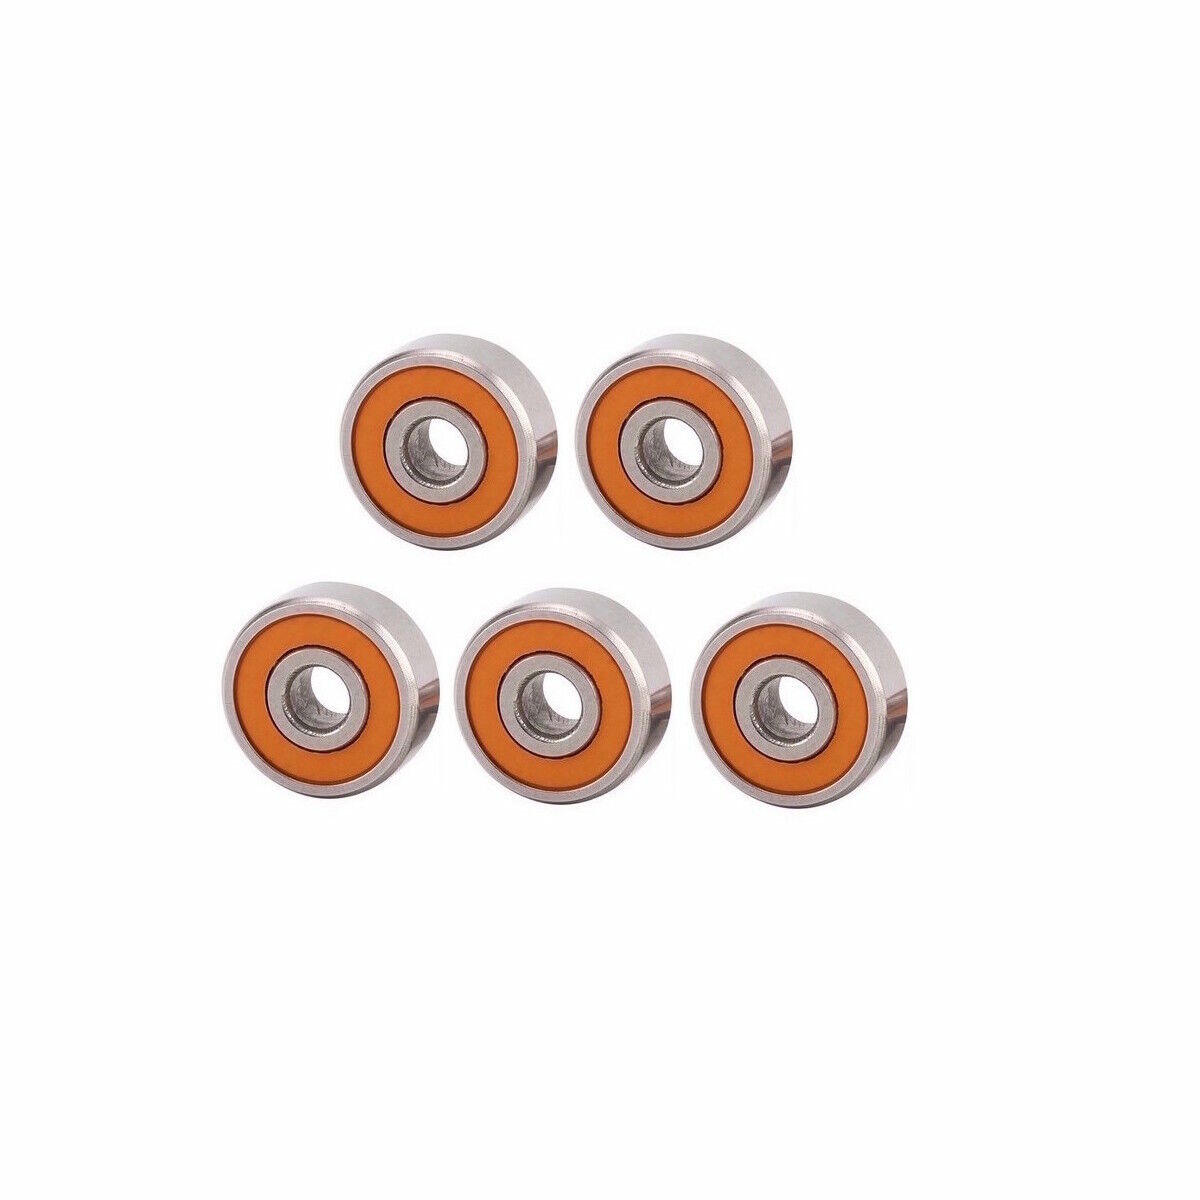 Lew's ABEC-7 Ceramic Super Tune bearing kits - Listed by Mod